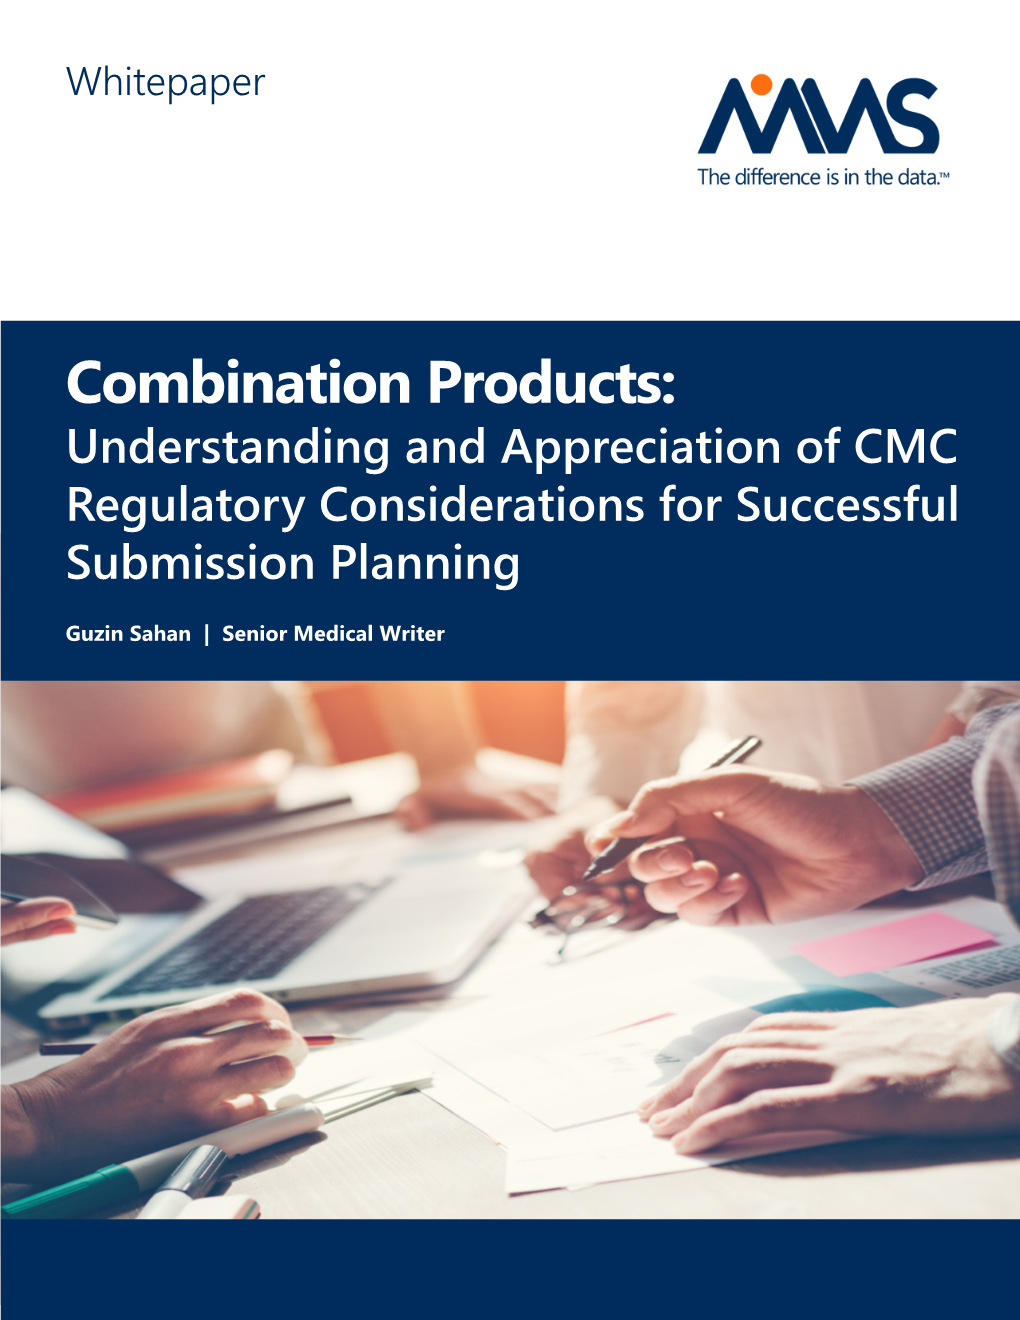 Combination Products: Understanding and Appreciation of CMC Regulatory Considerations for Successful Submission Planning